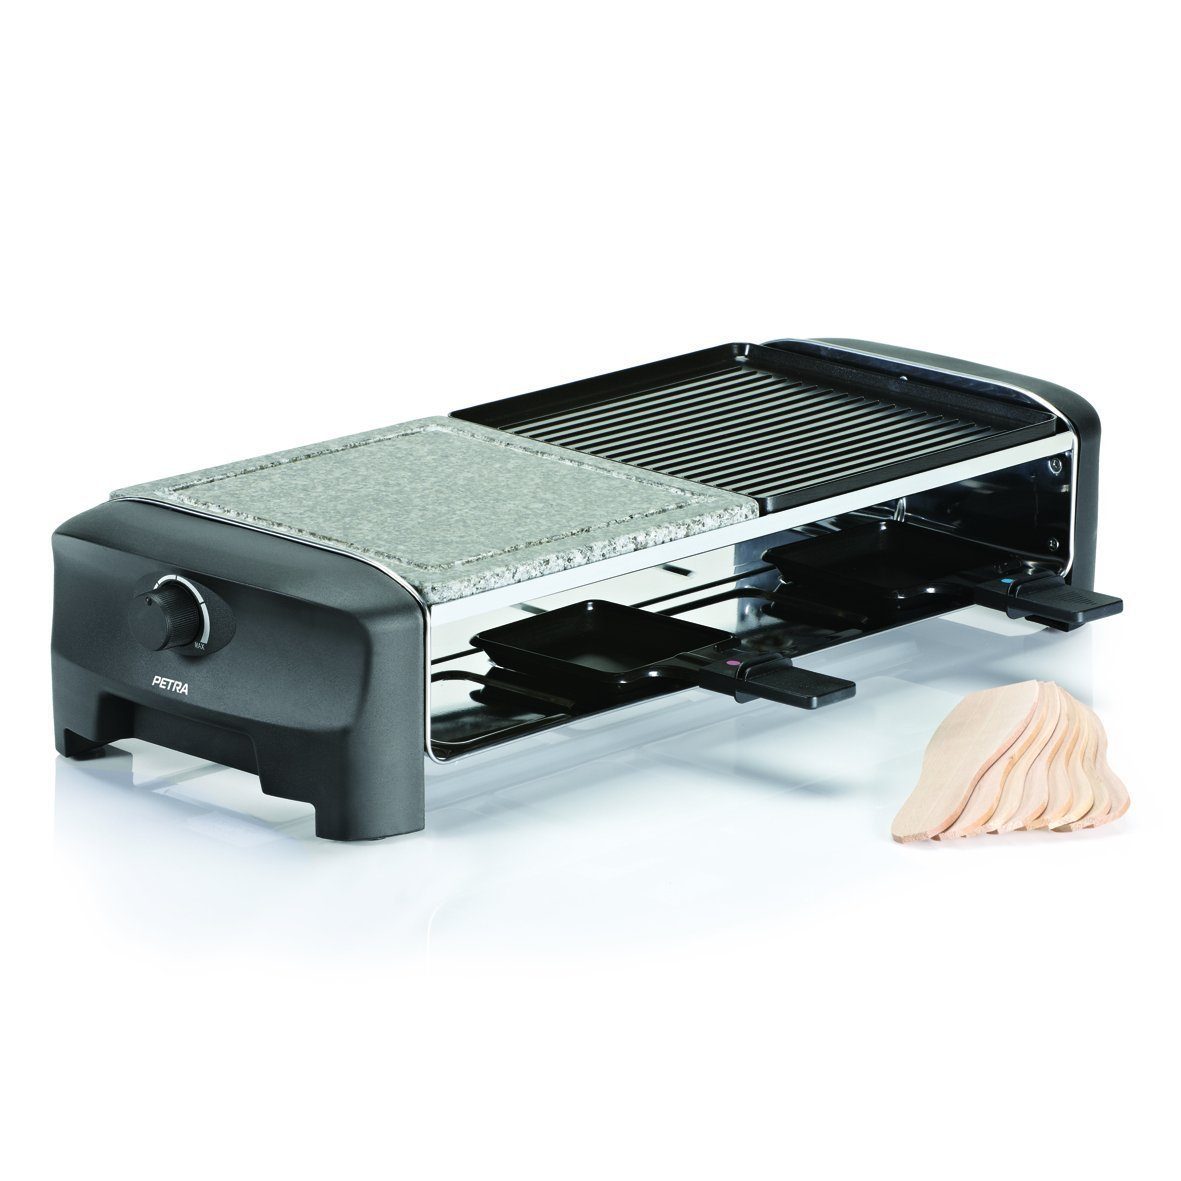 Petra Raclette Petra Stein RC80.47 Heißer 8 Raclette Pers.Raclettegrill Electric